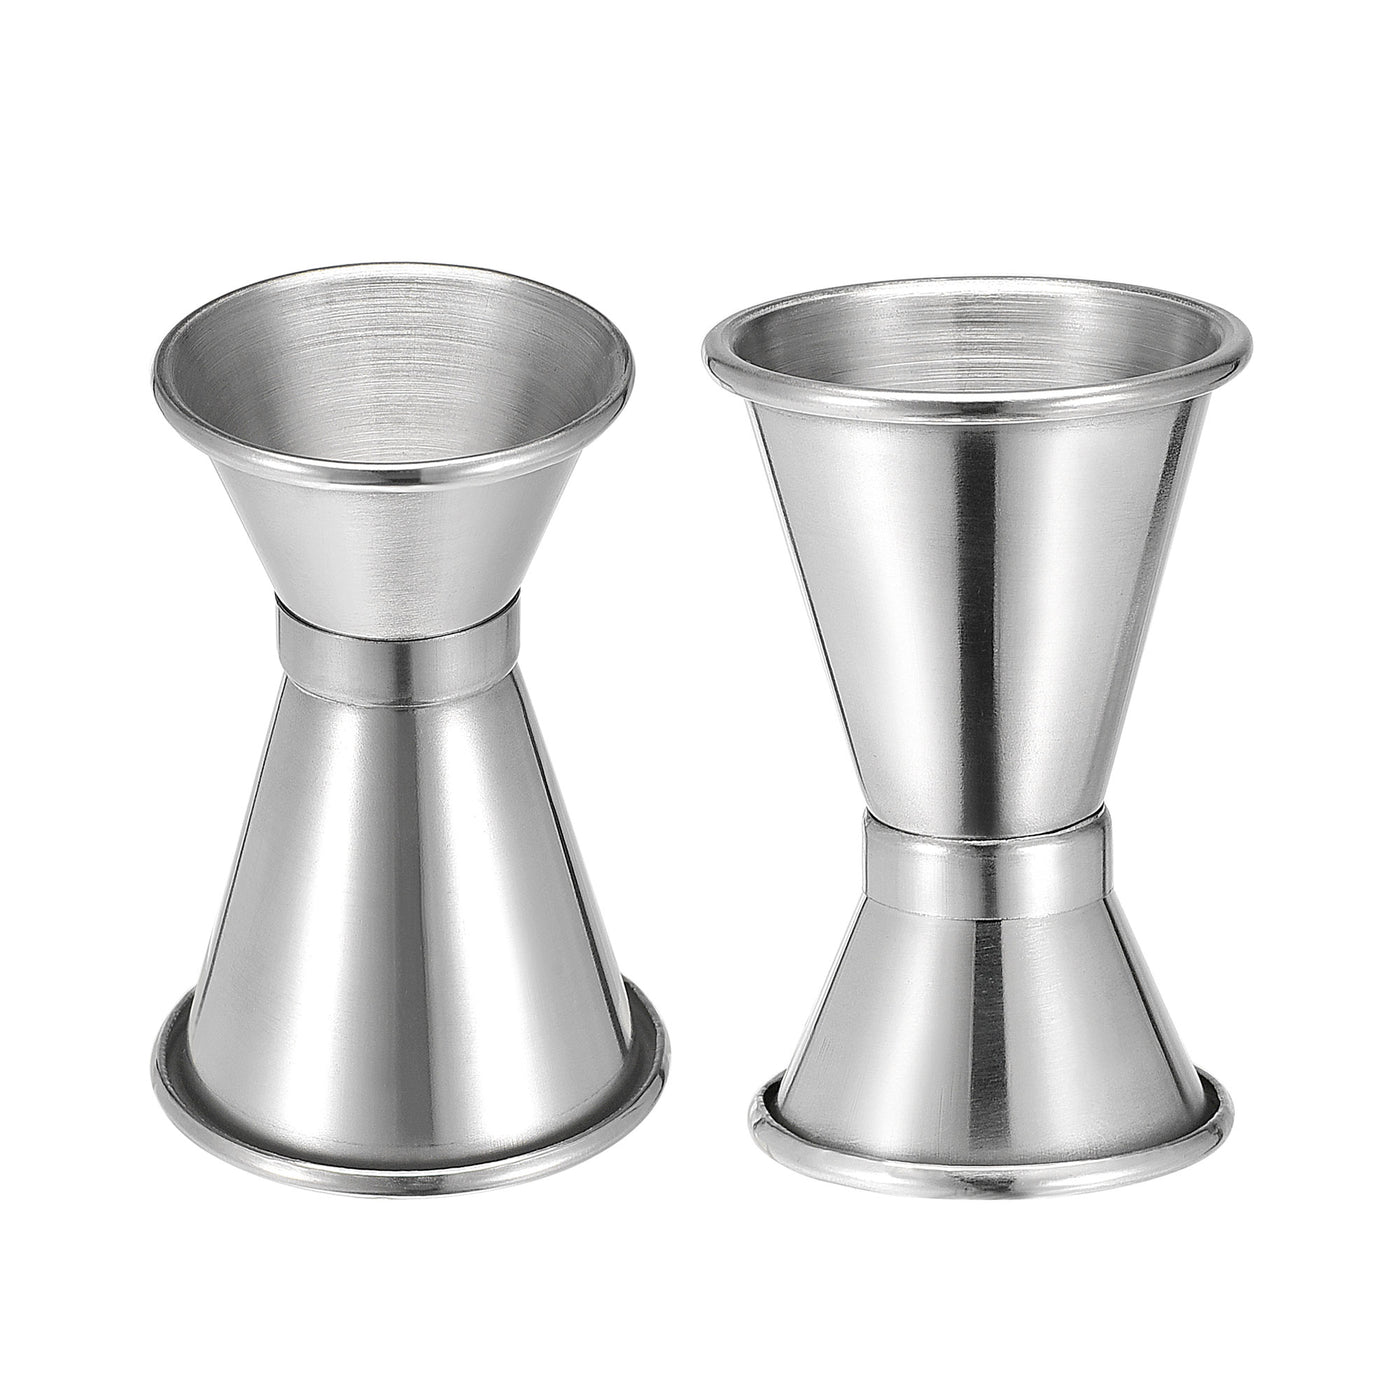 uxcell Uxcell Measuring Cup 25ml/15ml Stainless Steel Double Head Beaker Silver Tone